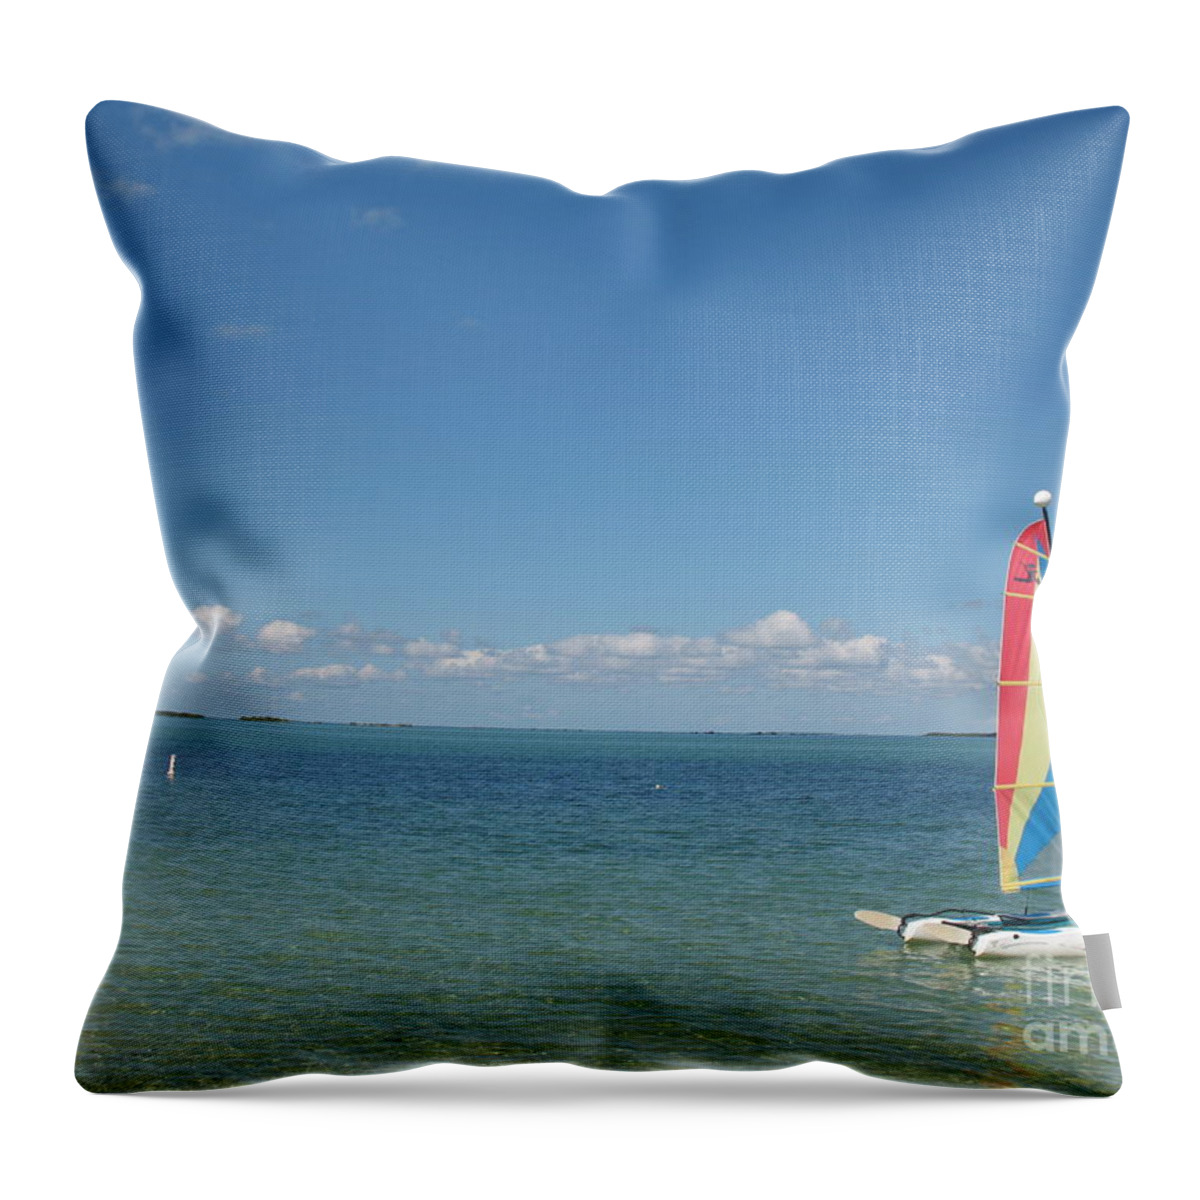 Sailing Throw Pillow featuring the photograph Sailing At Key Largo by Christiane Schulze Art And Photography